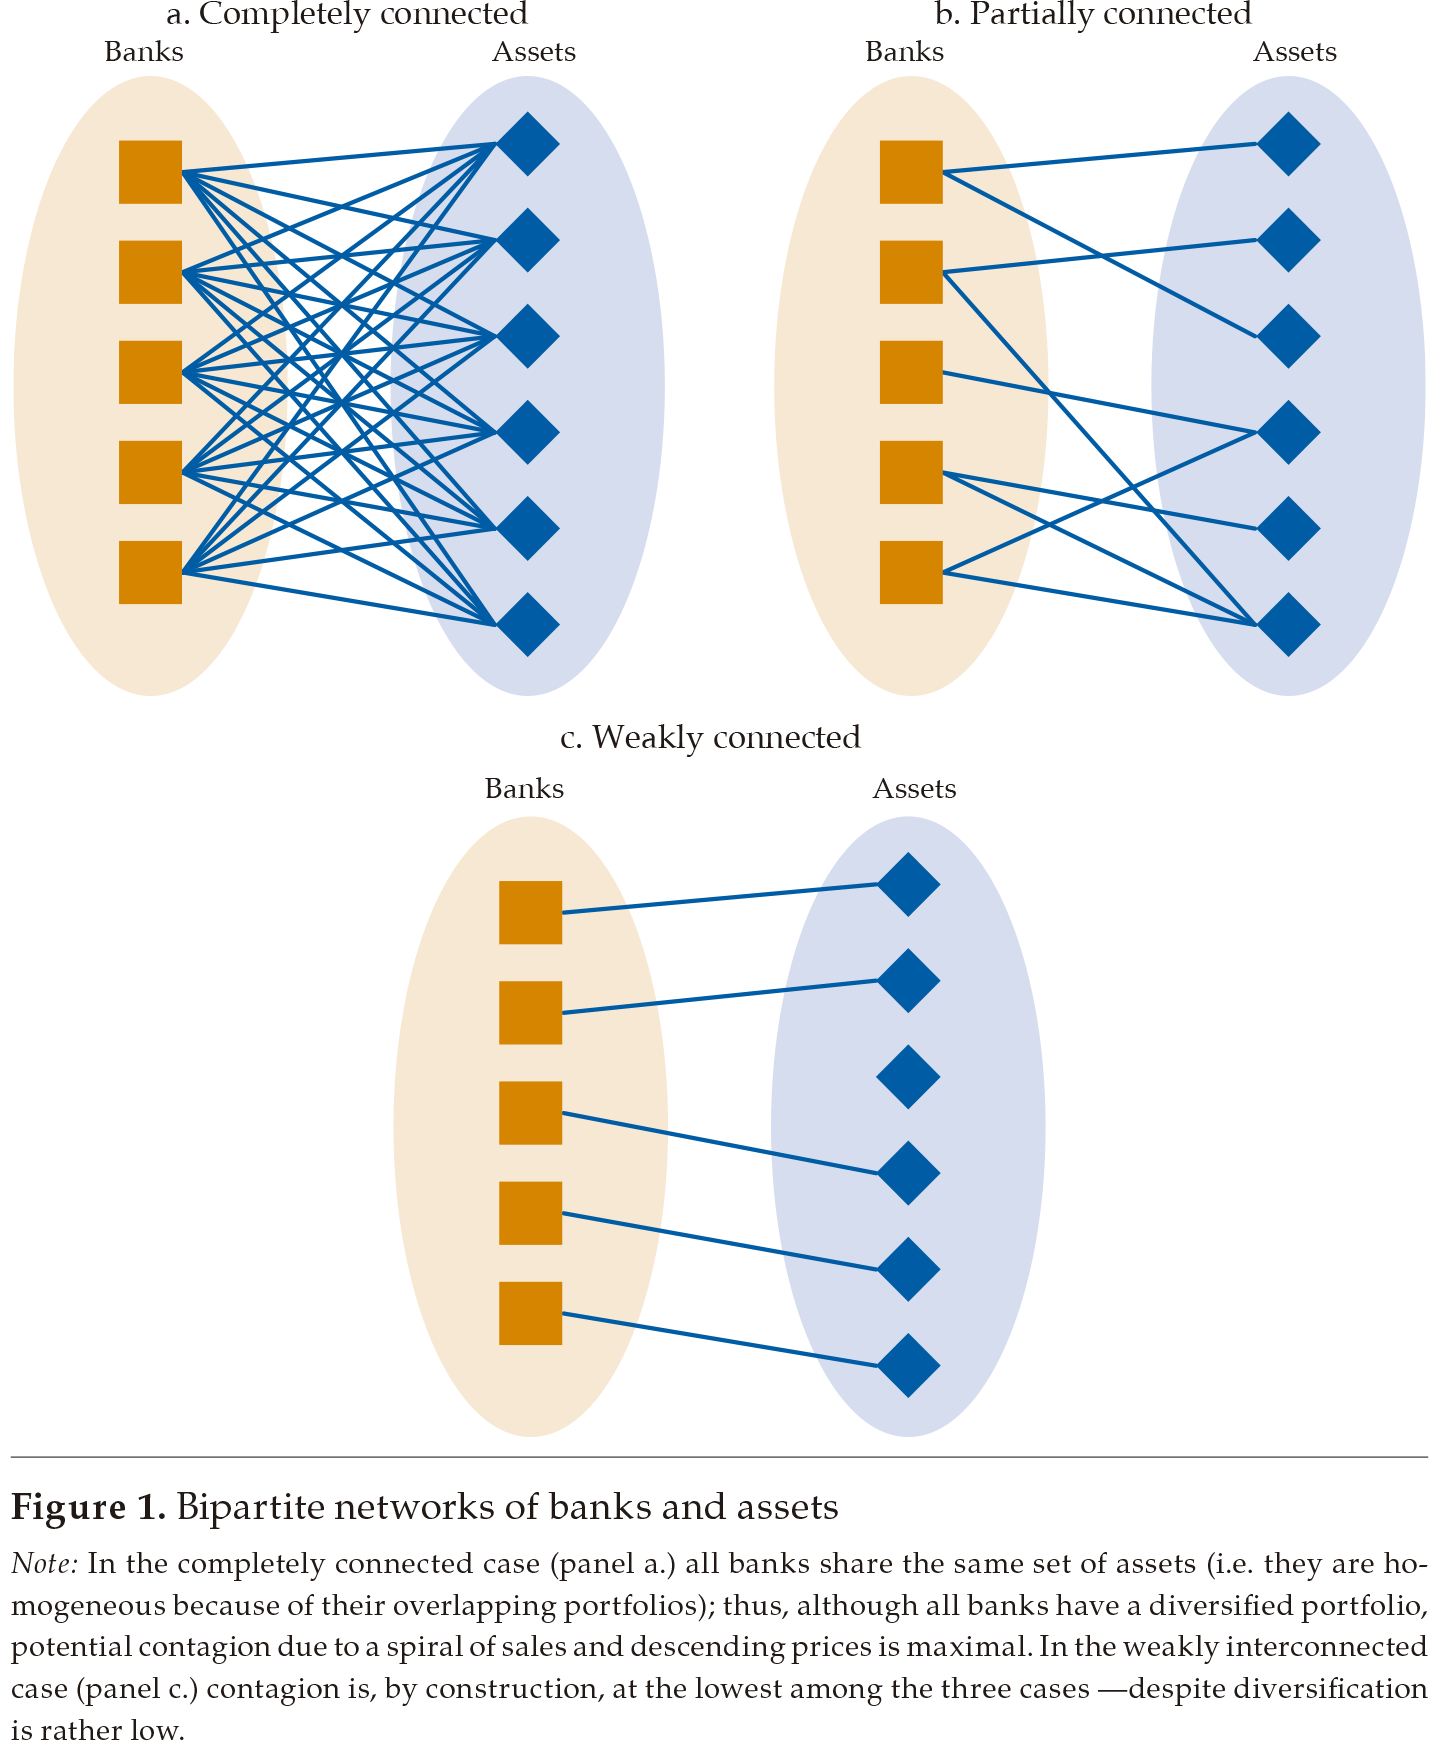 Bipartite networks of banks and assets